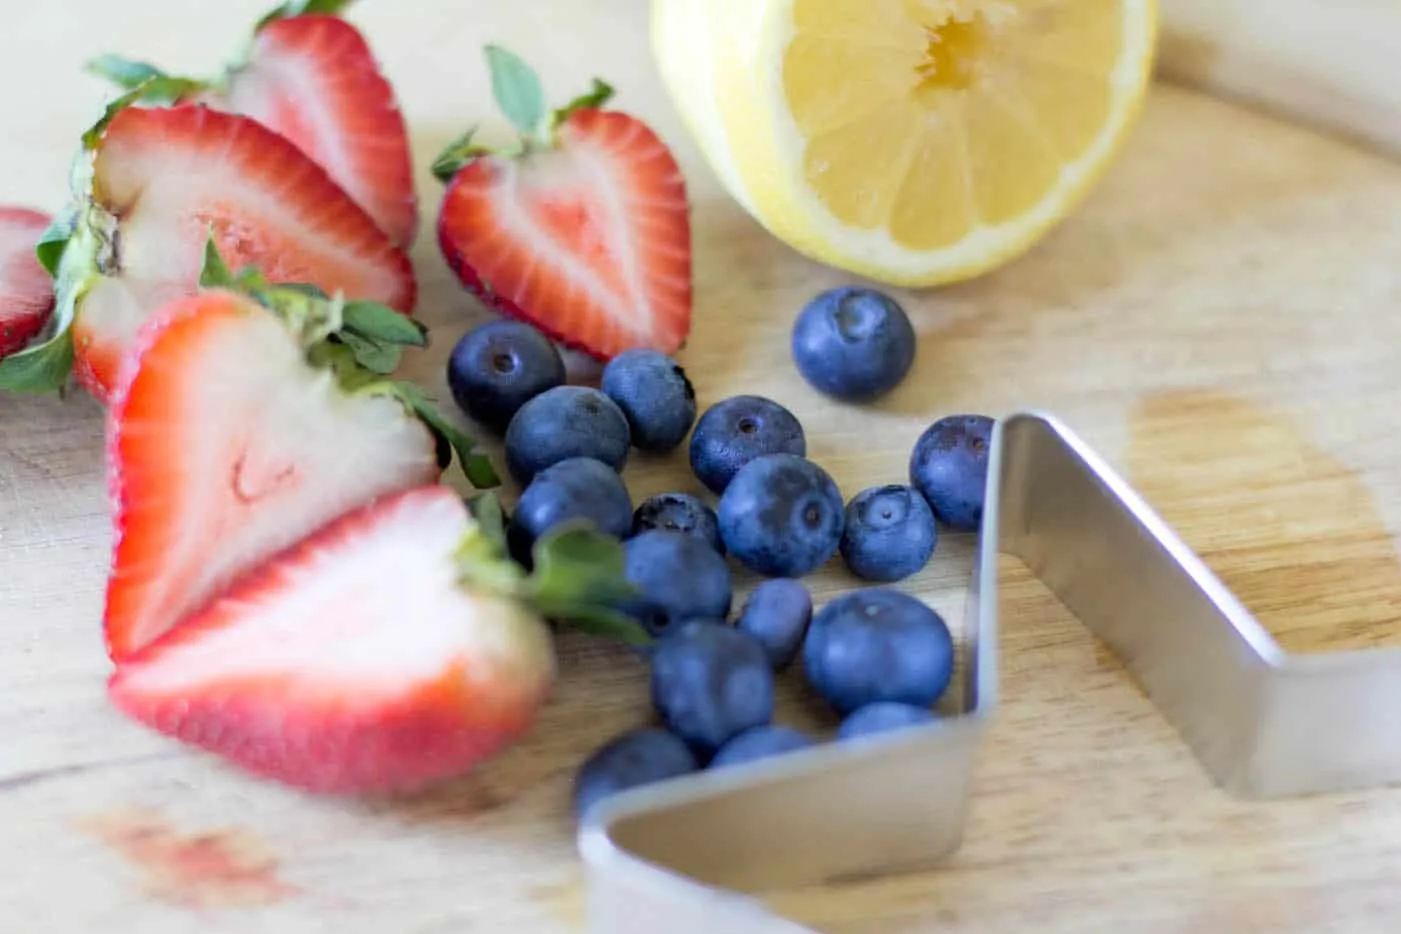 Strawberries, blueberries, lemon and a star cookie cutter